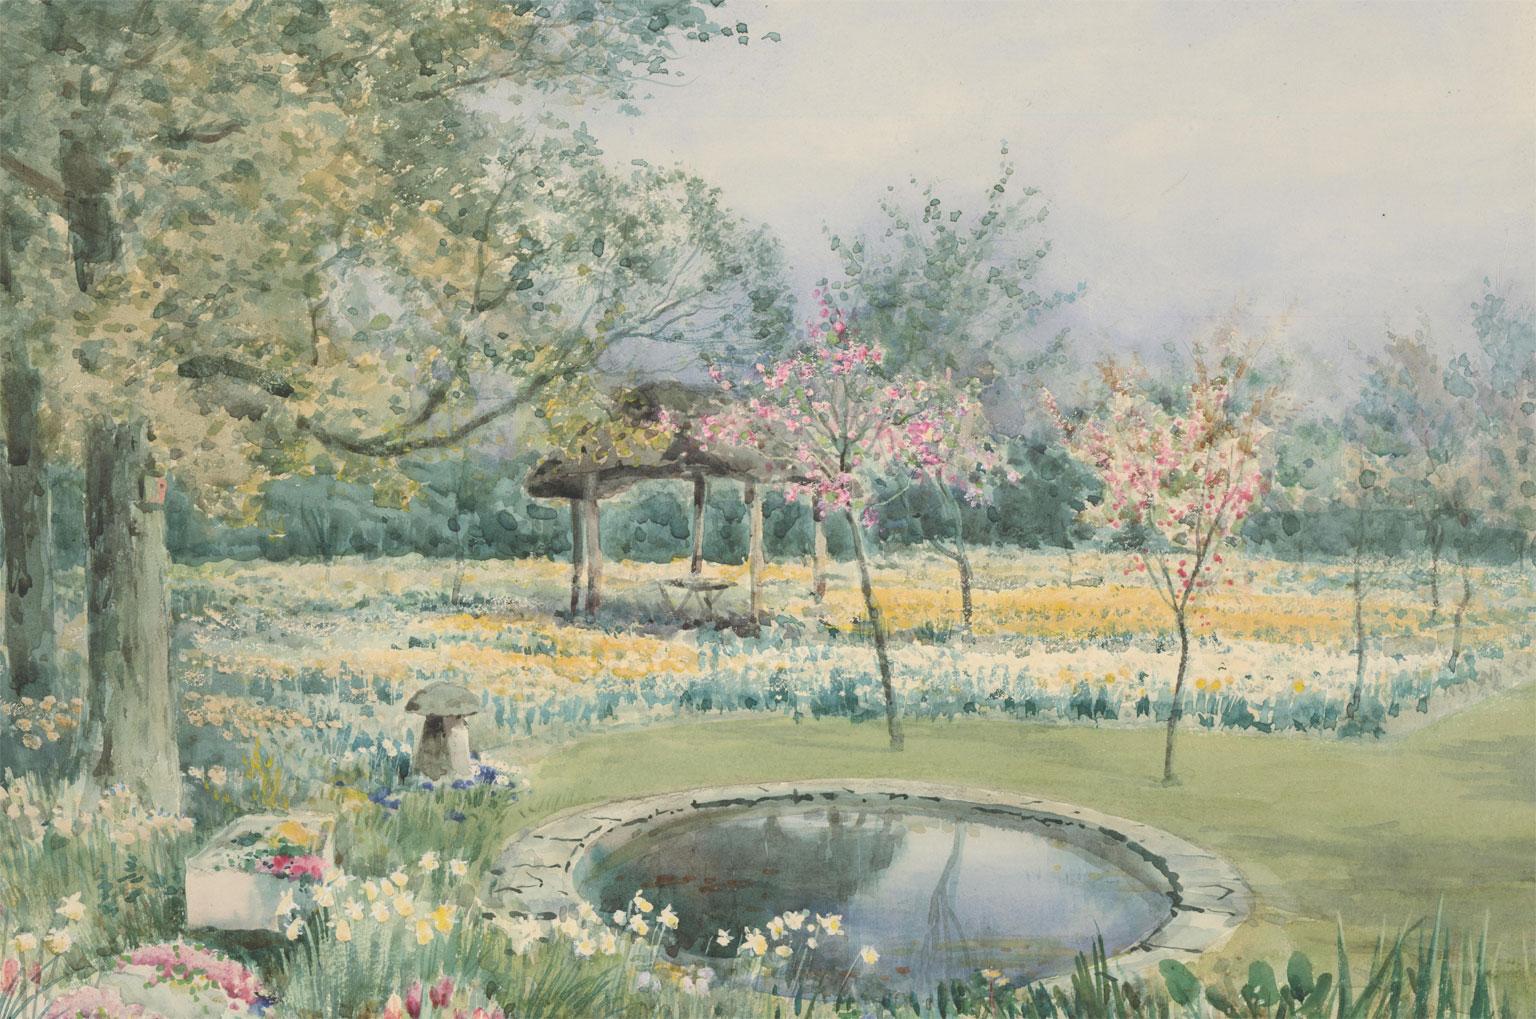 A fine watercolour painting on watercolour paper, laid to thick card, by the listed artist Sylvester Stannard, depicting a Spring garden. The artist's use of colour and delicate brushstrokes work together to create a beautiful and striking